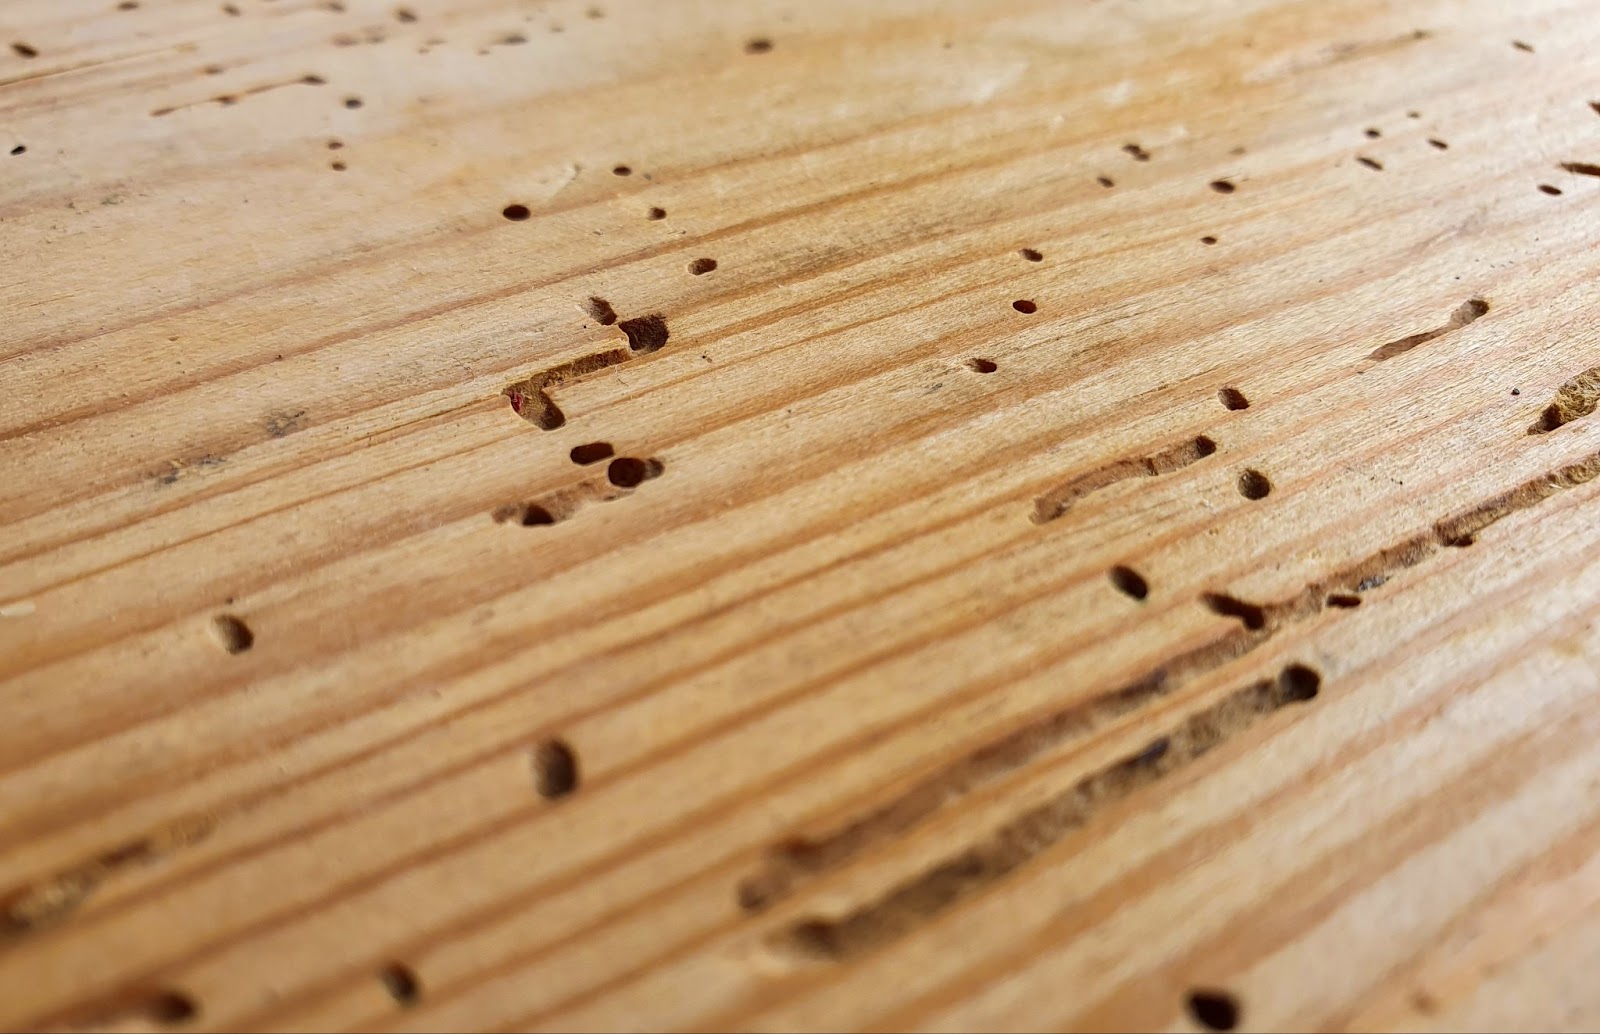  The hardwood floor's texture is marked with various insect holes, giving it a weathered and distressed appearance.